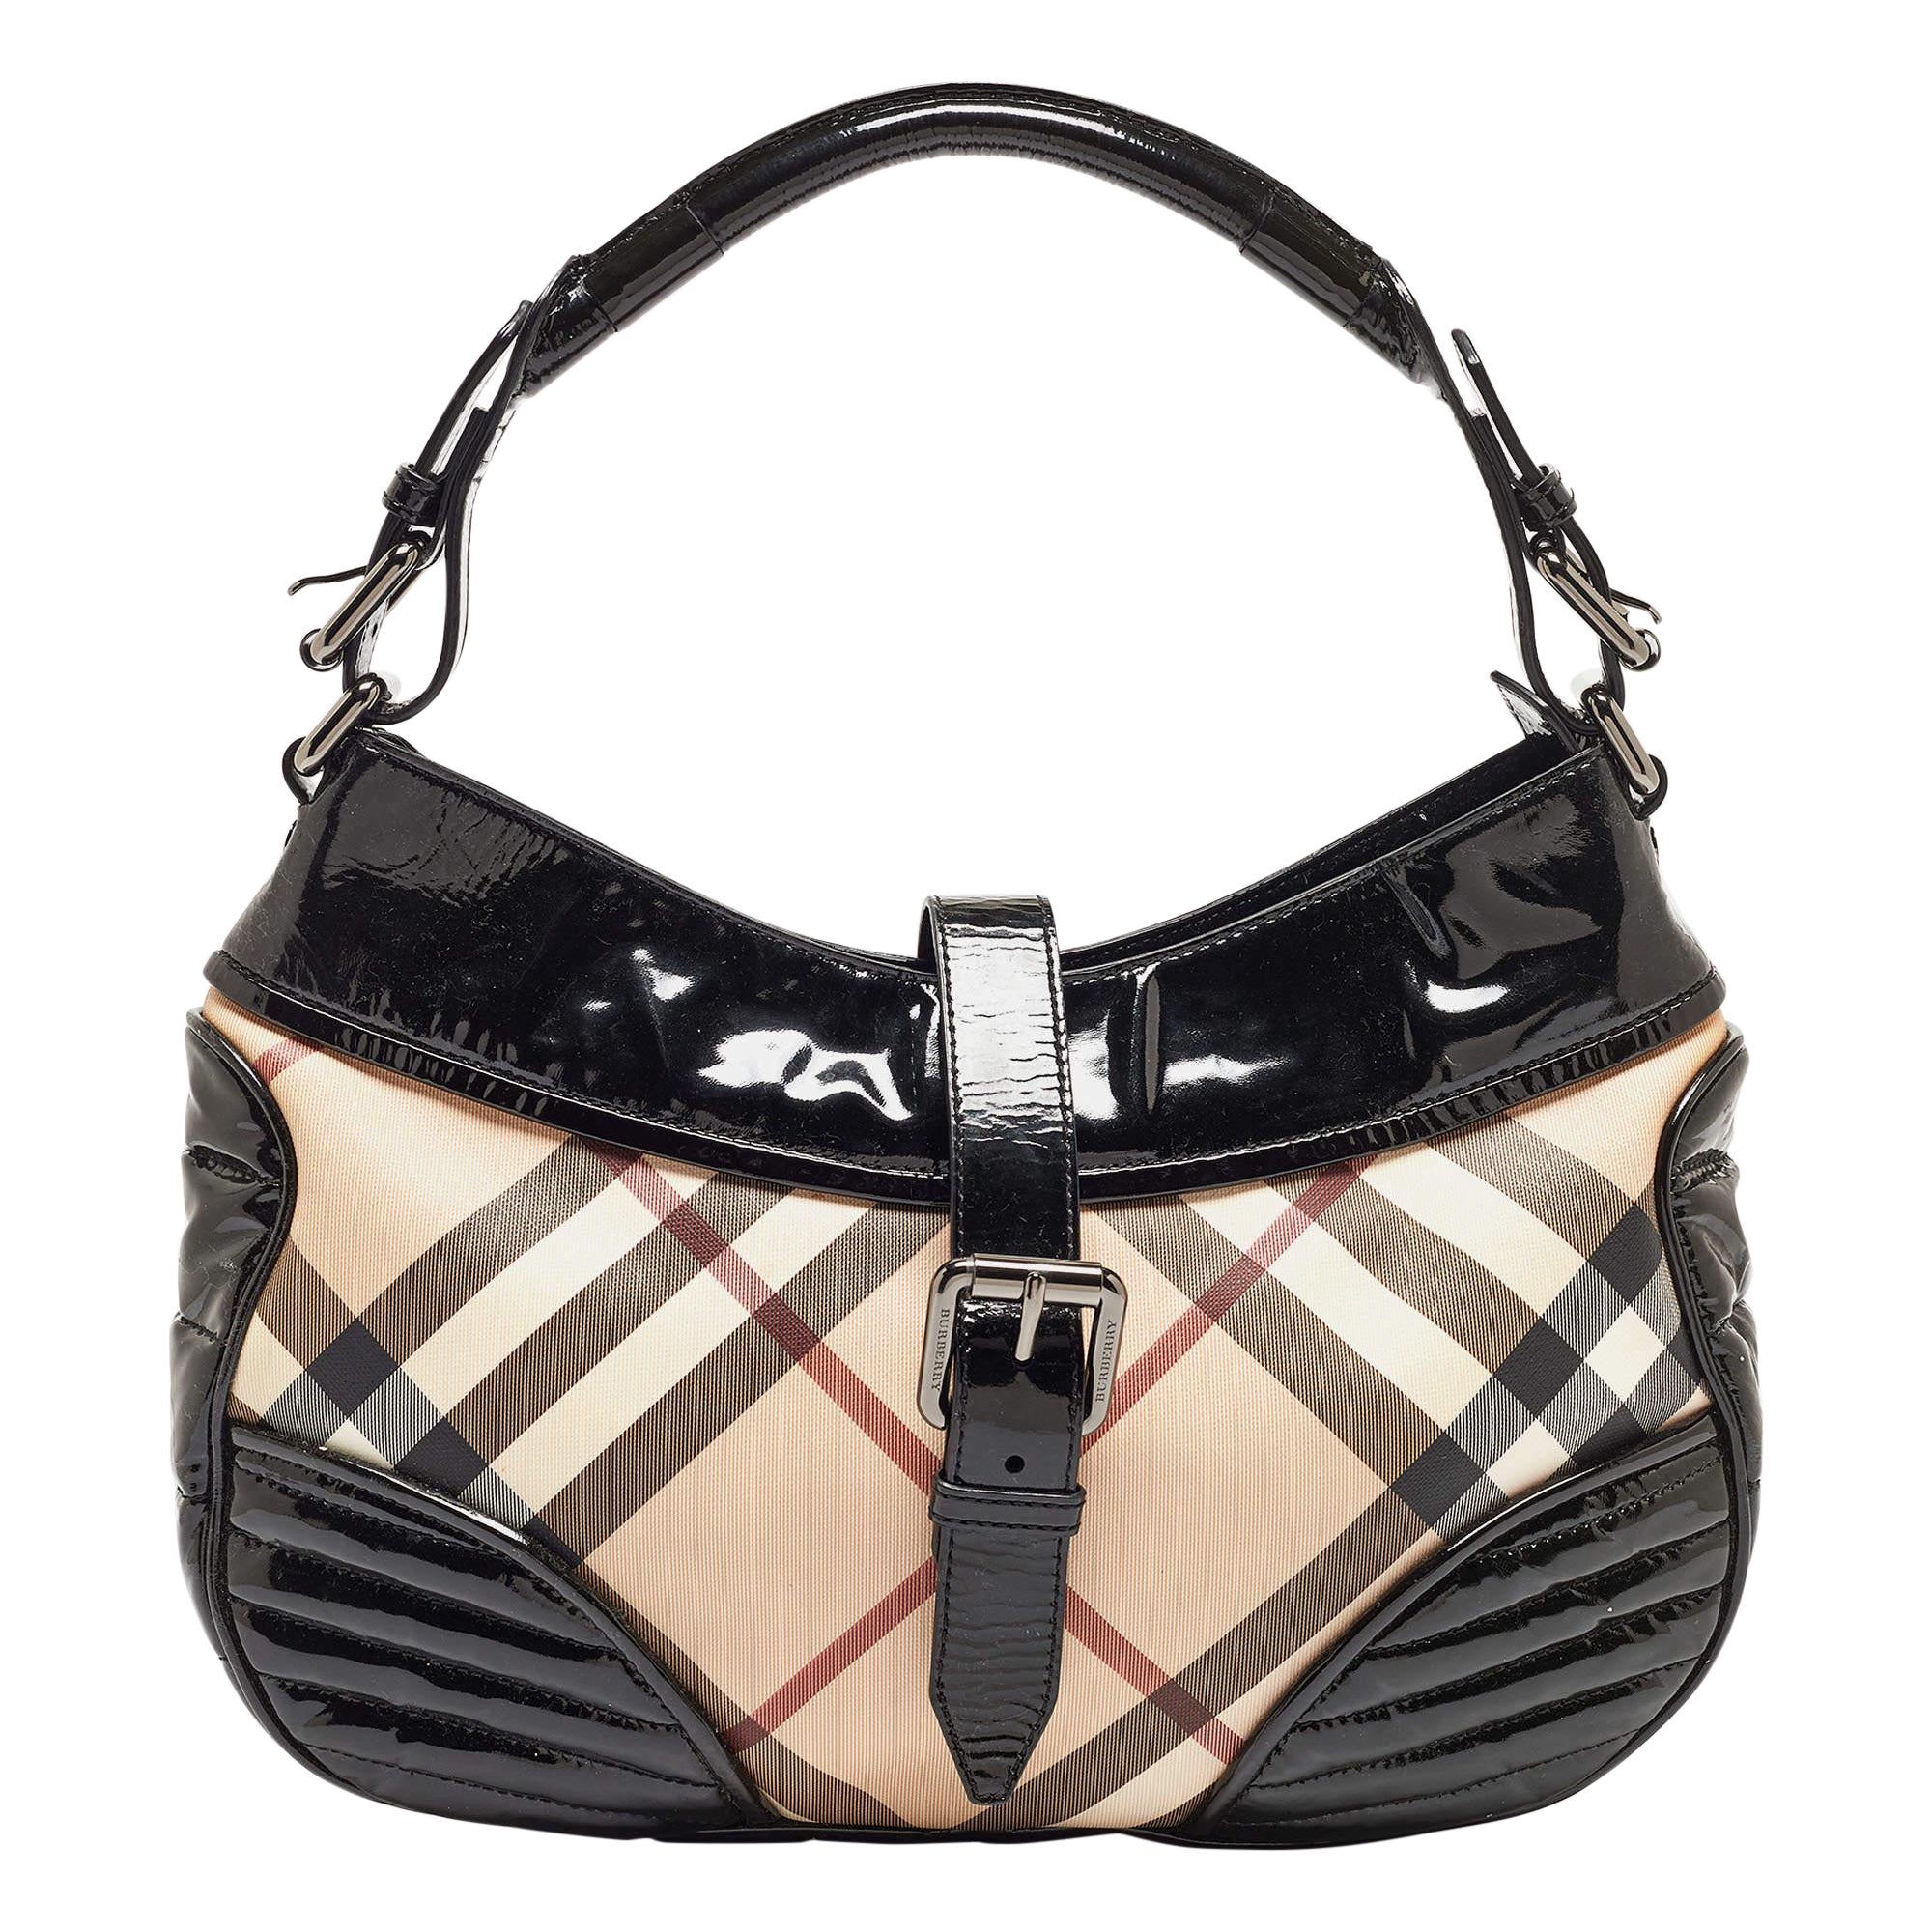 Burberry Black/Beige Nova Check PVC and Patent Leather Hobo For Sale